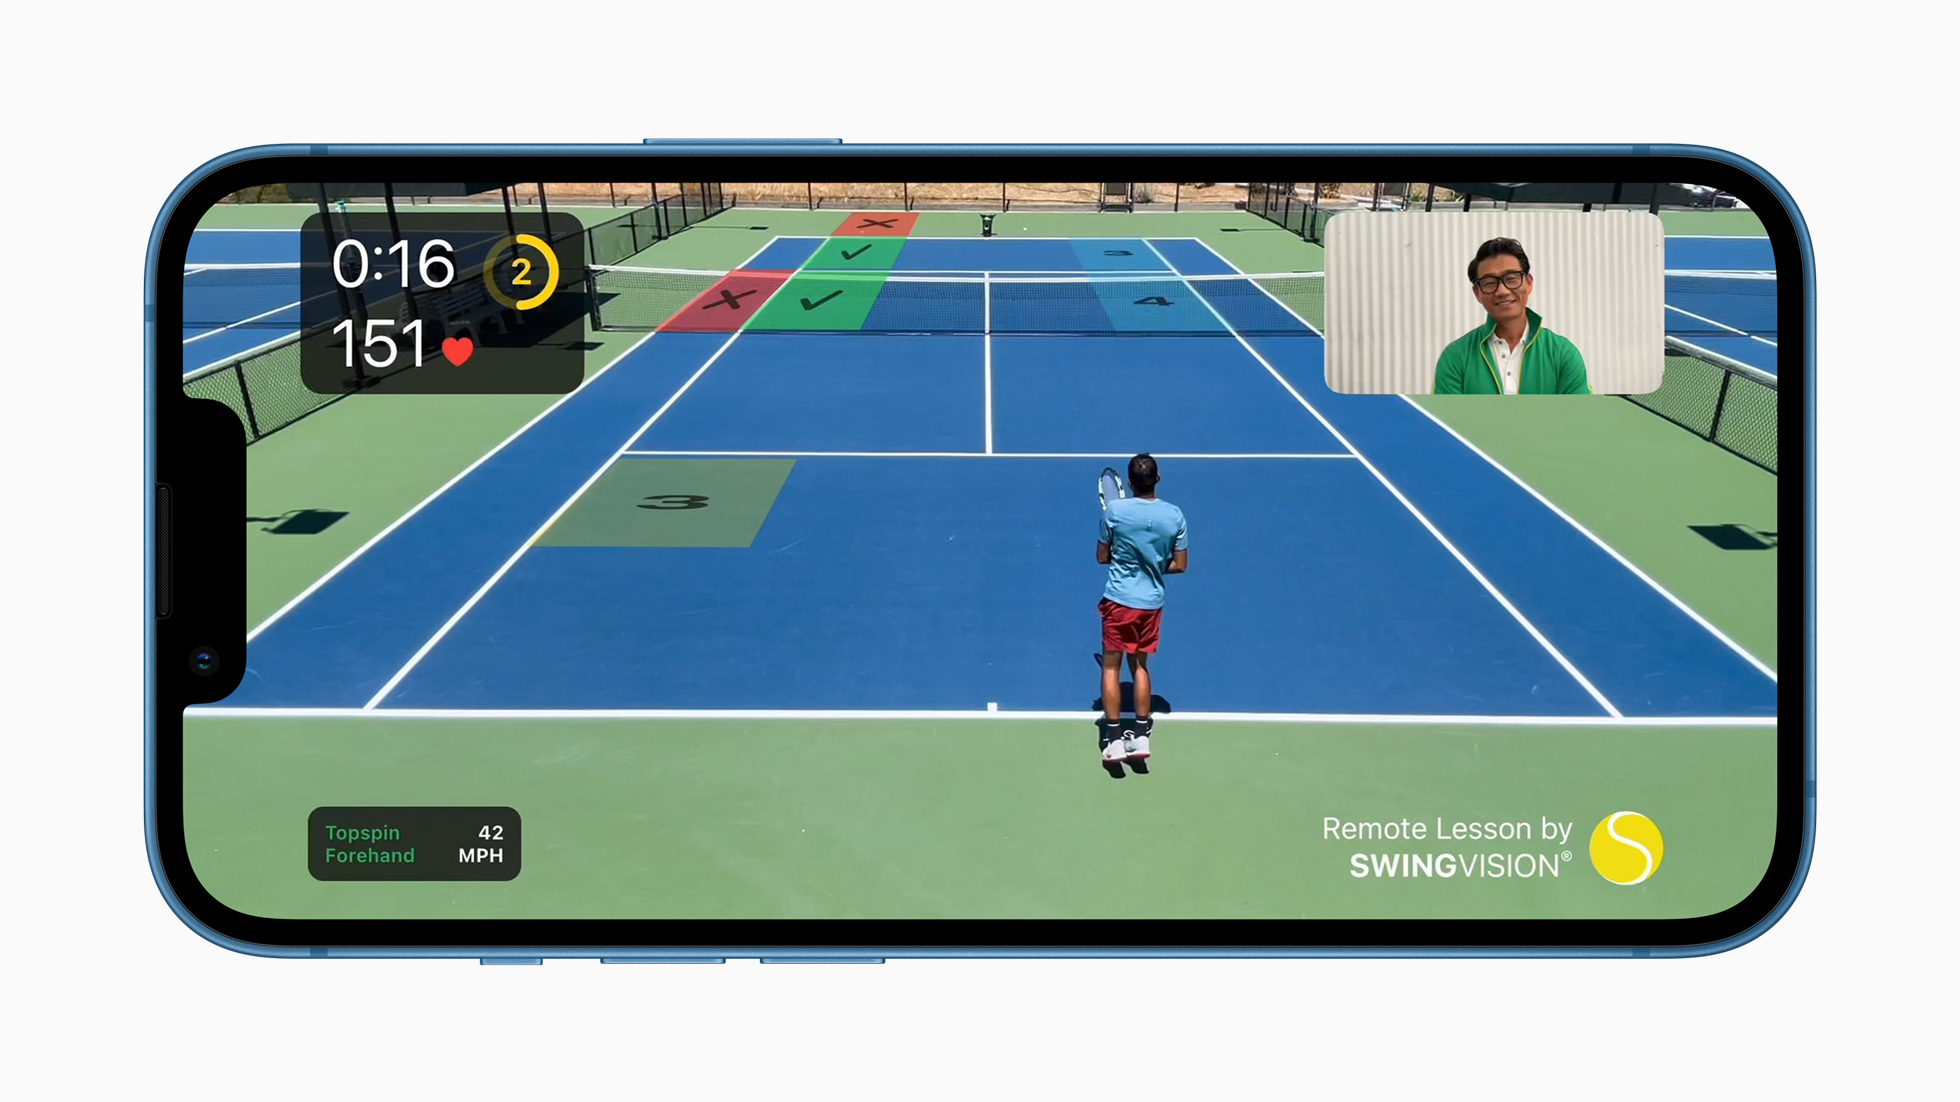 nordøst Elendighed vigtigste Smartphones are now clever enough to coach you at tennis